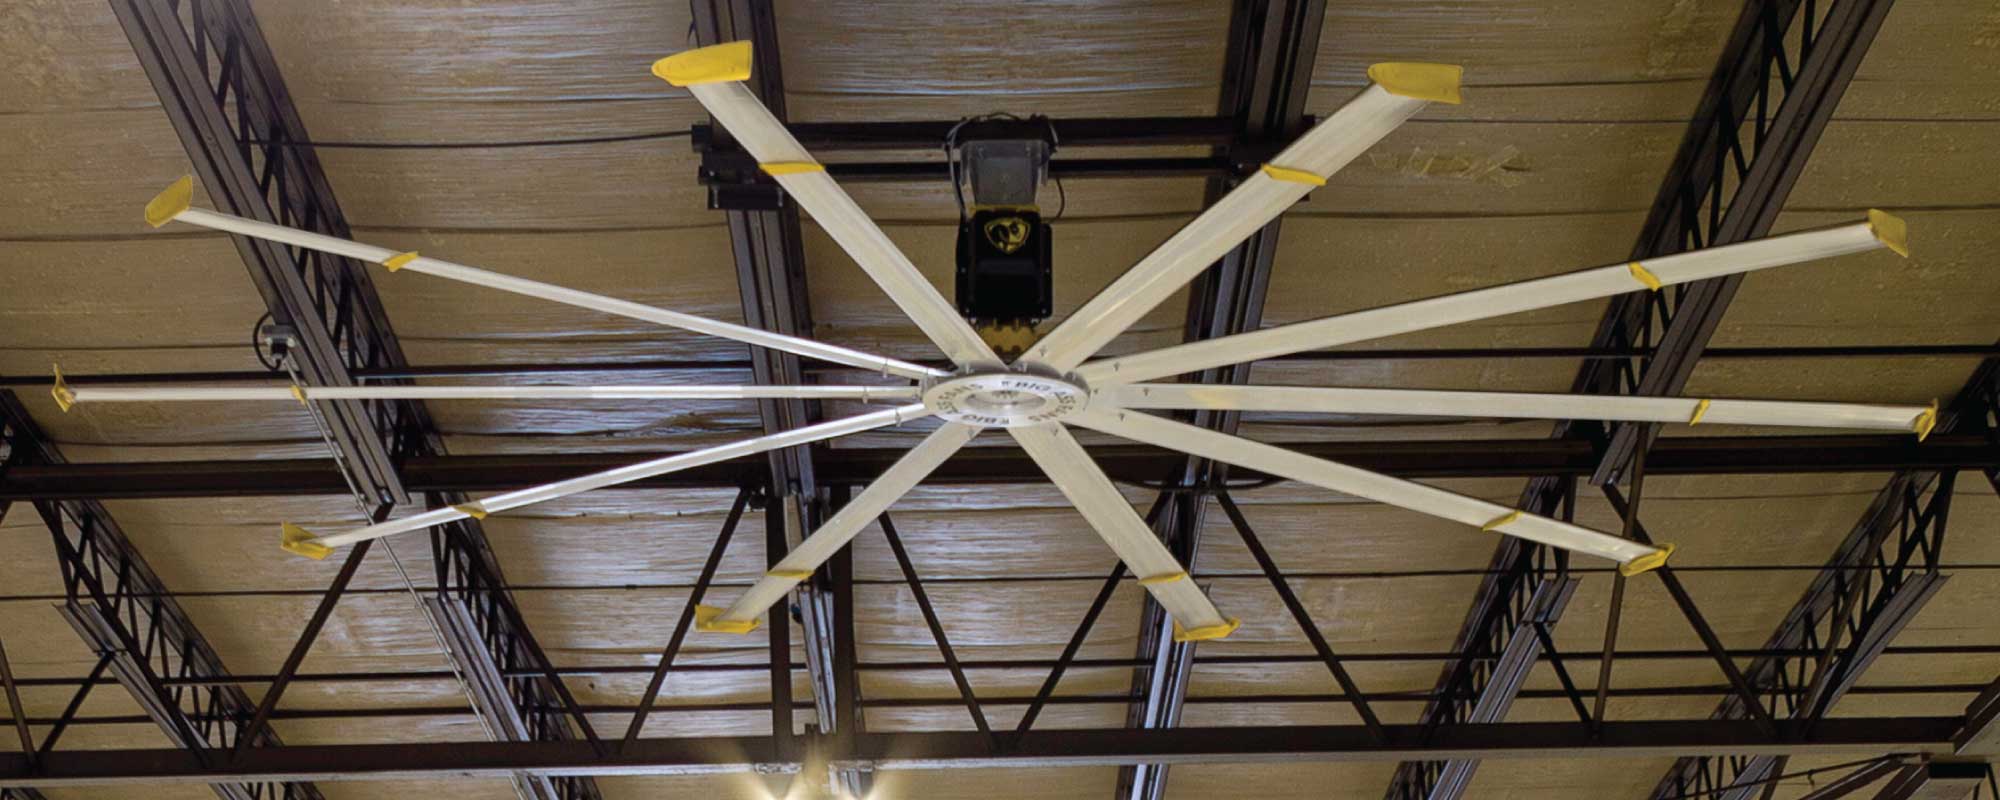 High-Volume Low-Speed Fan for a Warehouse